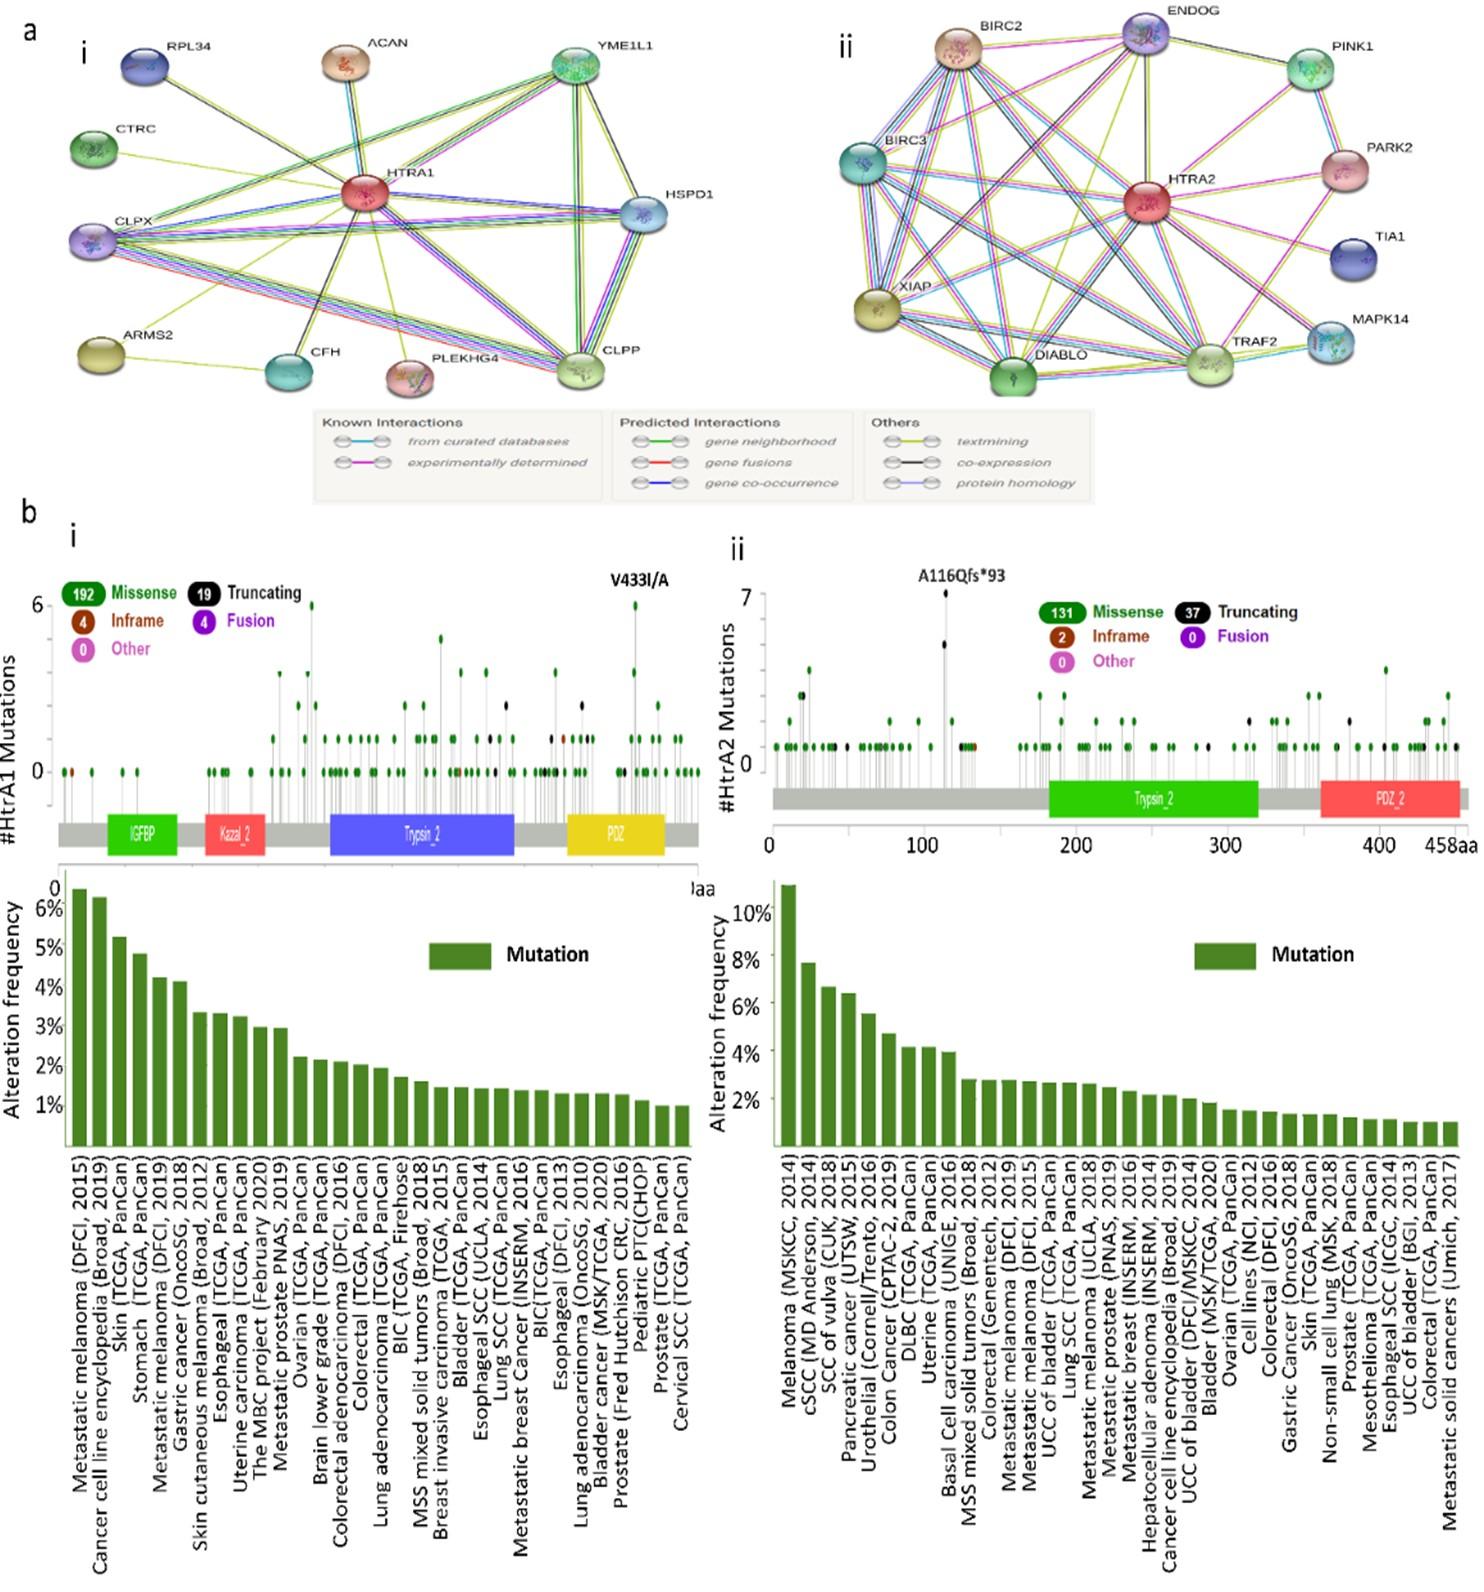 HTRA1 and HTRA2 expression differentially modulate the clinical prognosis of cancer: a multi-omics analysis using bioinformatics approaches